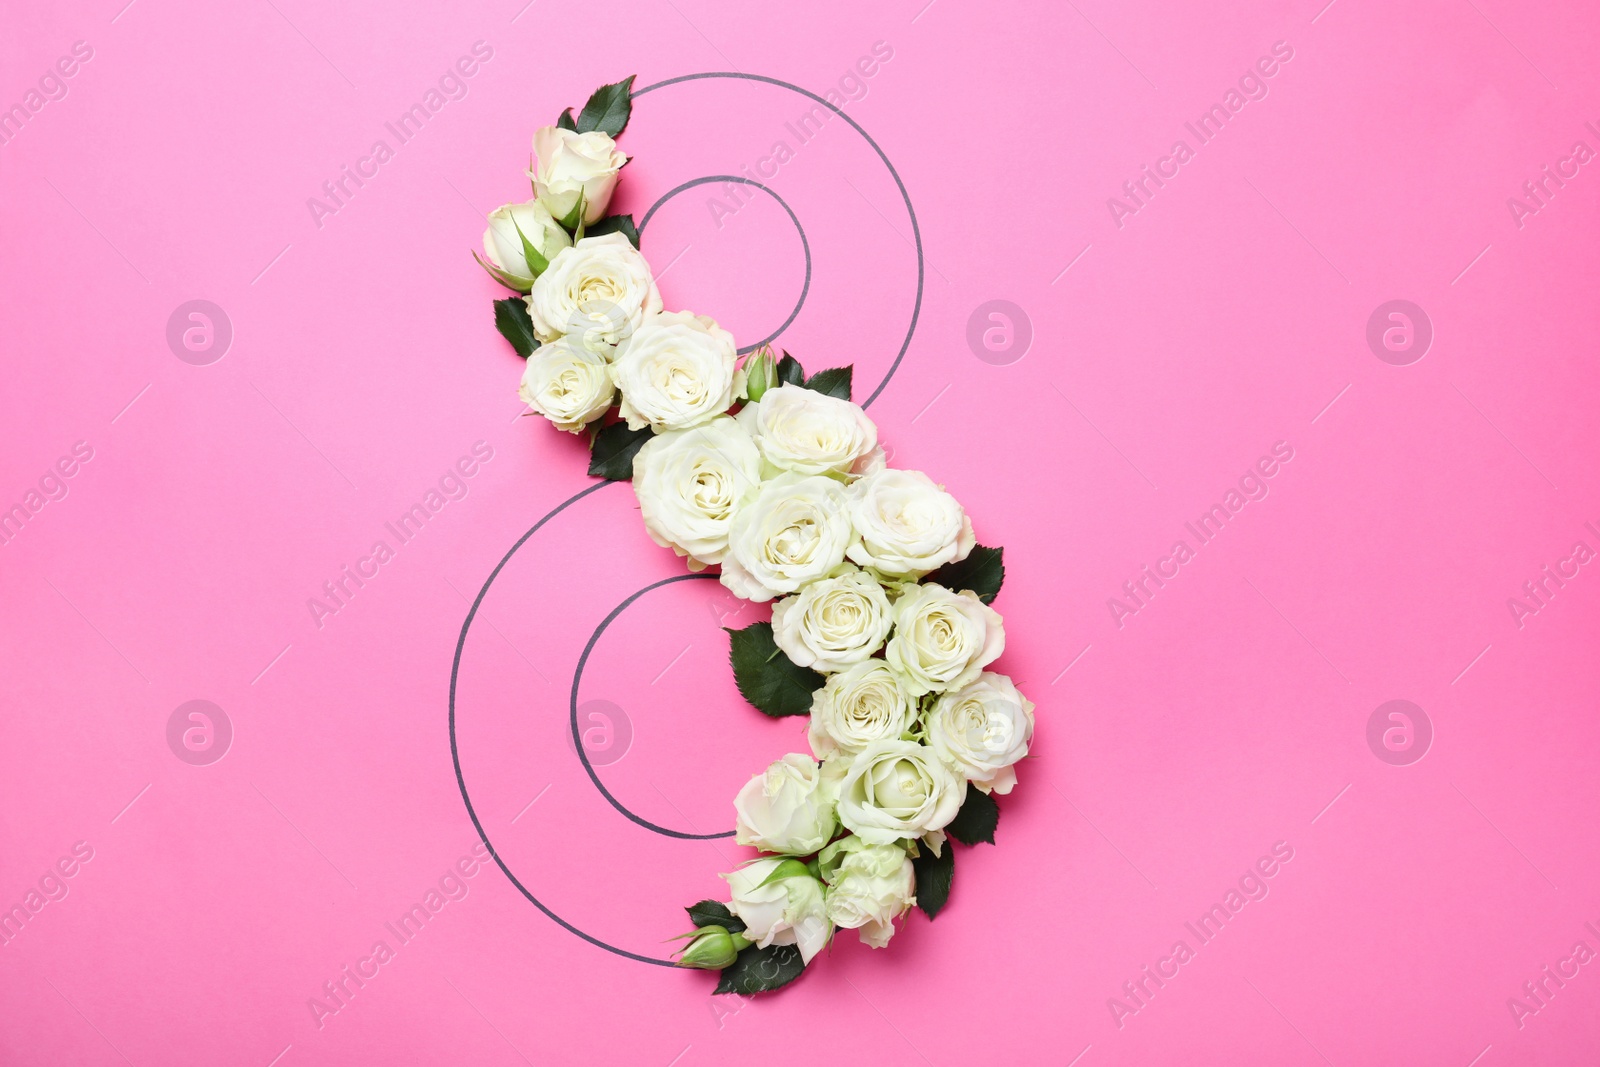 Photo of 8 March greeting card design with white roses on pink background, flat lay. International Women's day